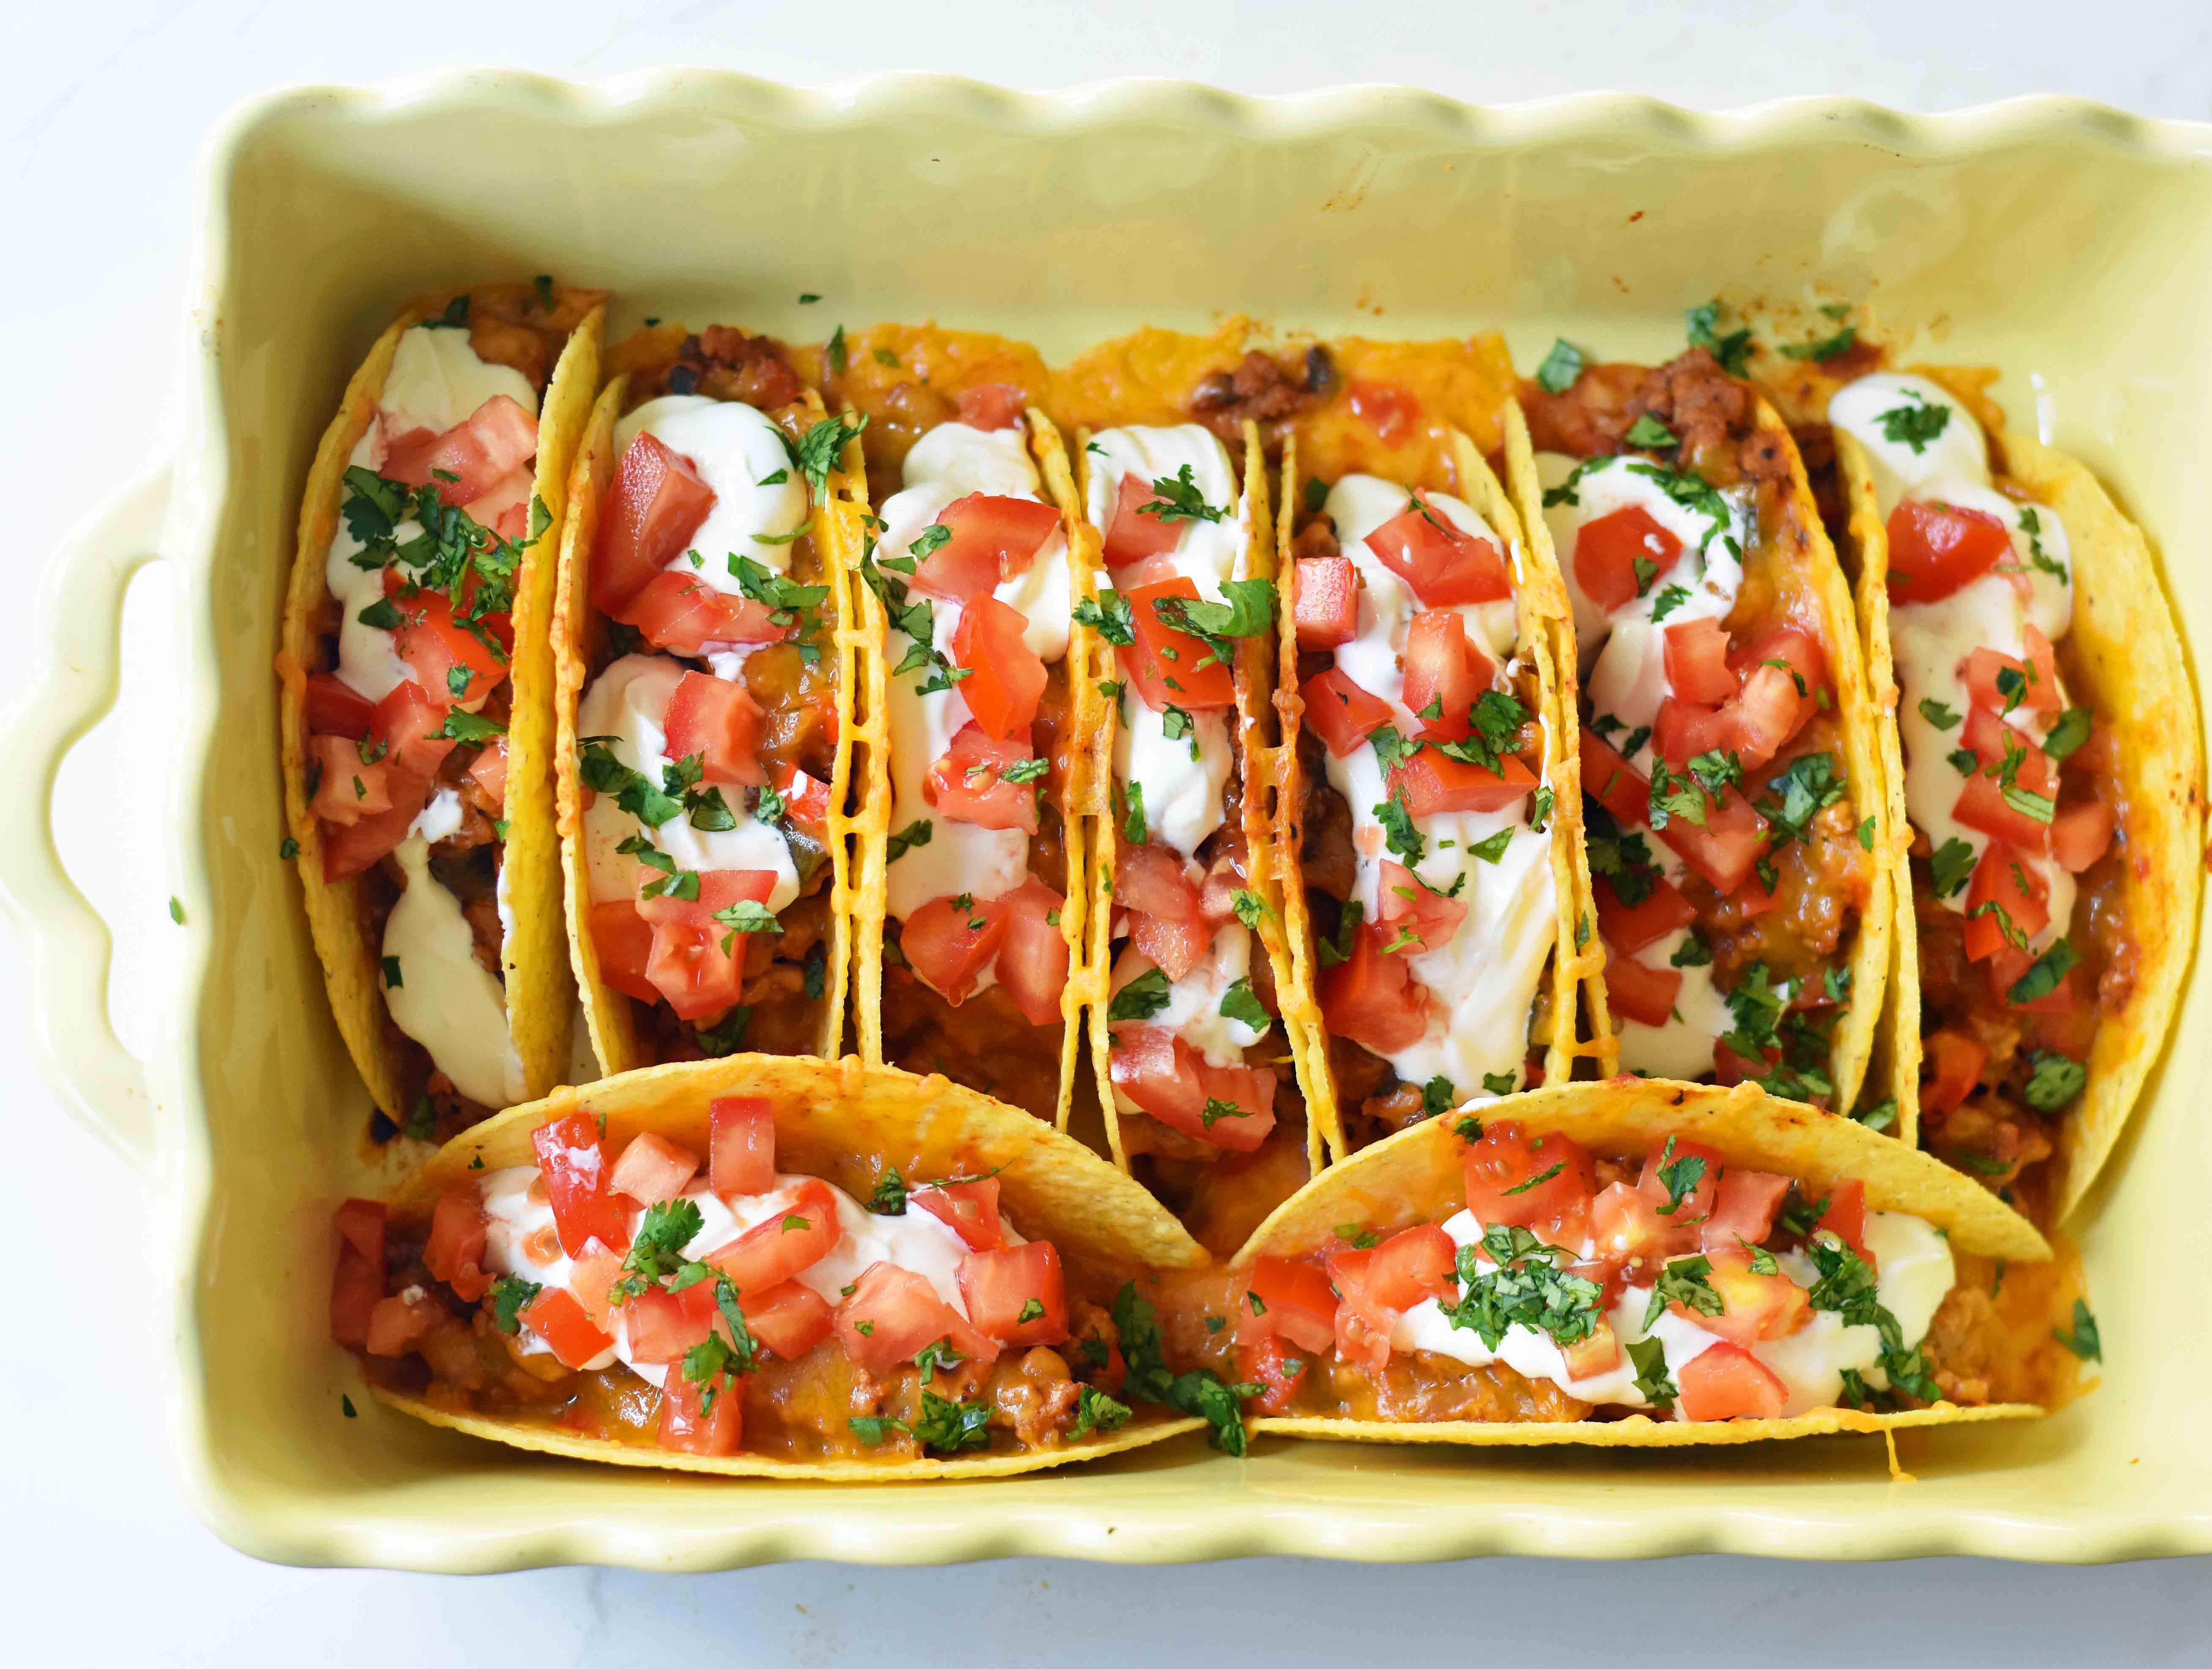 Easy Oven Baked Beef Tacos. Perfectly seasoned ground beef tacos and Mexican cheese baked in taco shells until melted. Topped with sour cream, guacamole, salsa, diced tomatoes, and hot sauce. These are party tacos and a family favorite dinner. www.modernhoney.com